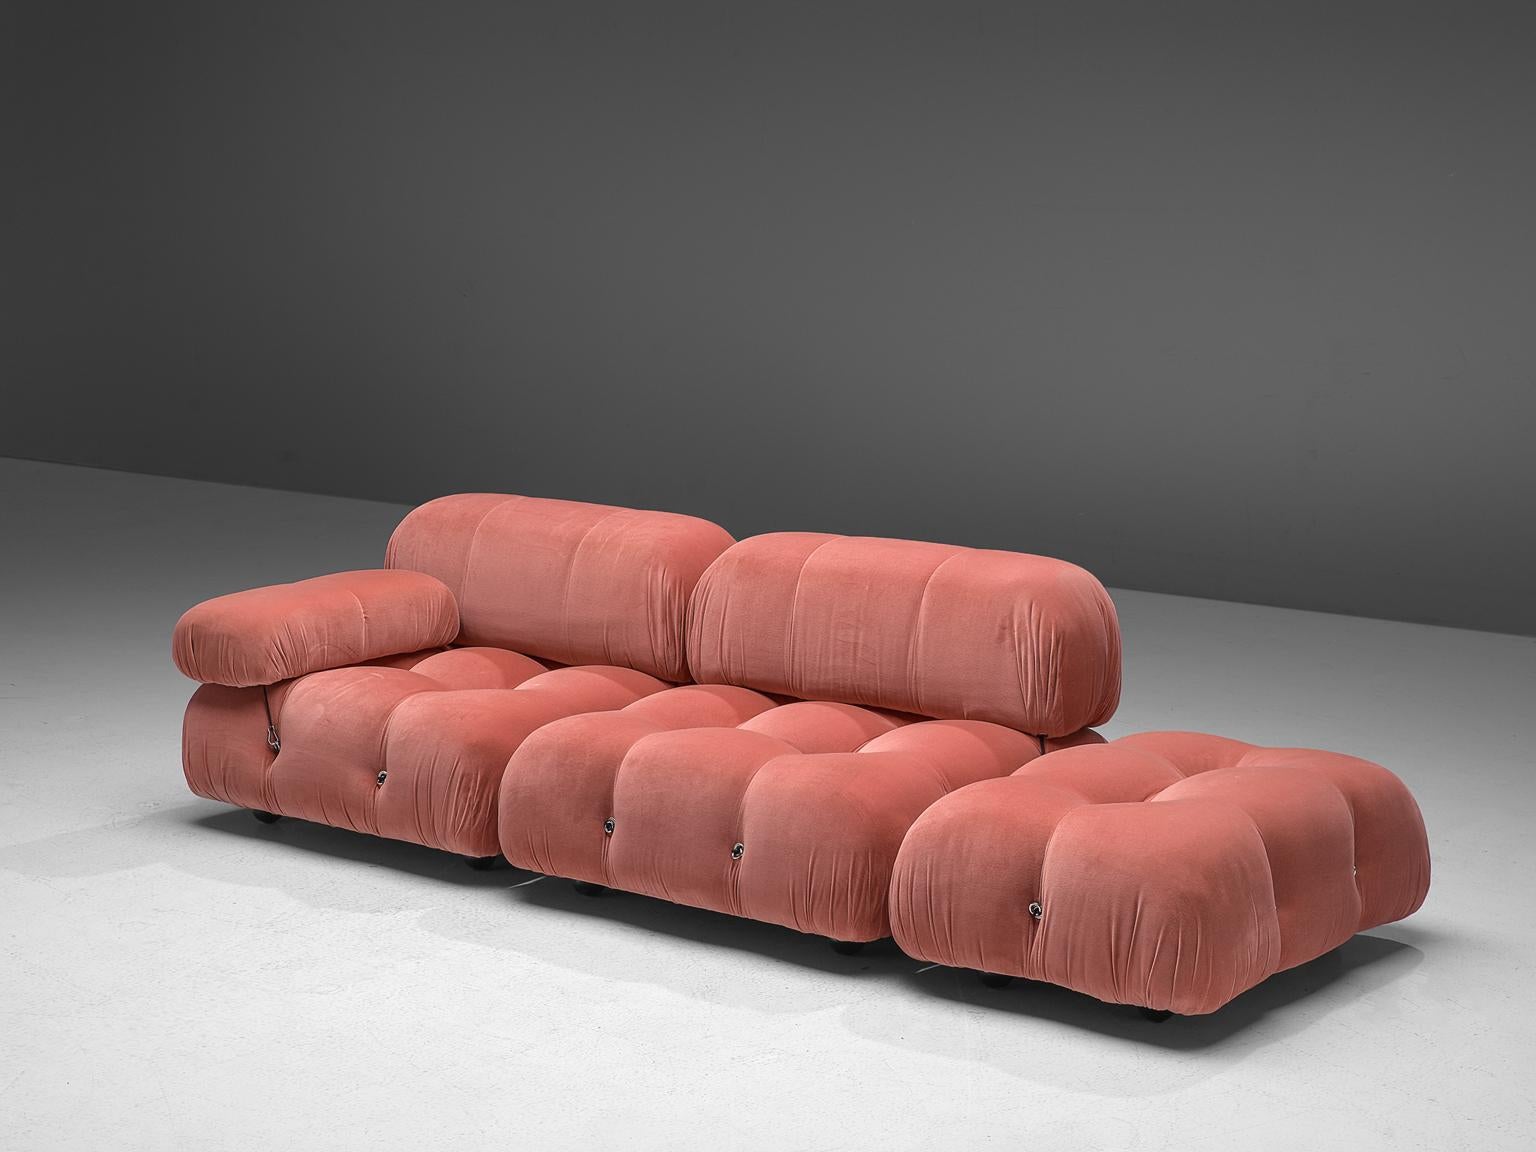 Mario Bellini, modular 'Cameleonda' sofa in pink fabric, Italy, 1972.

The sectional elements of this sofa can be used freely and apart from one another. The upholstery on this piece features original pink velvet. The backs are provided with rings